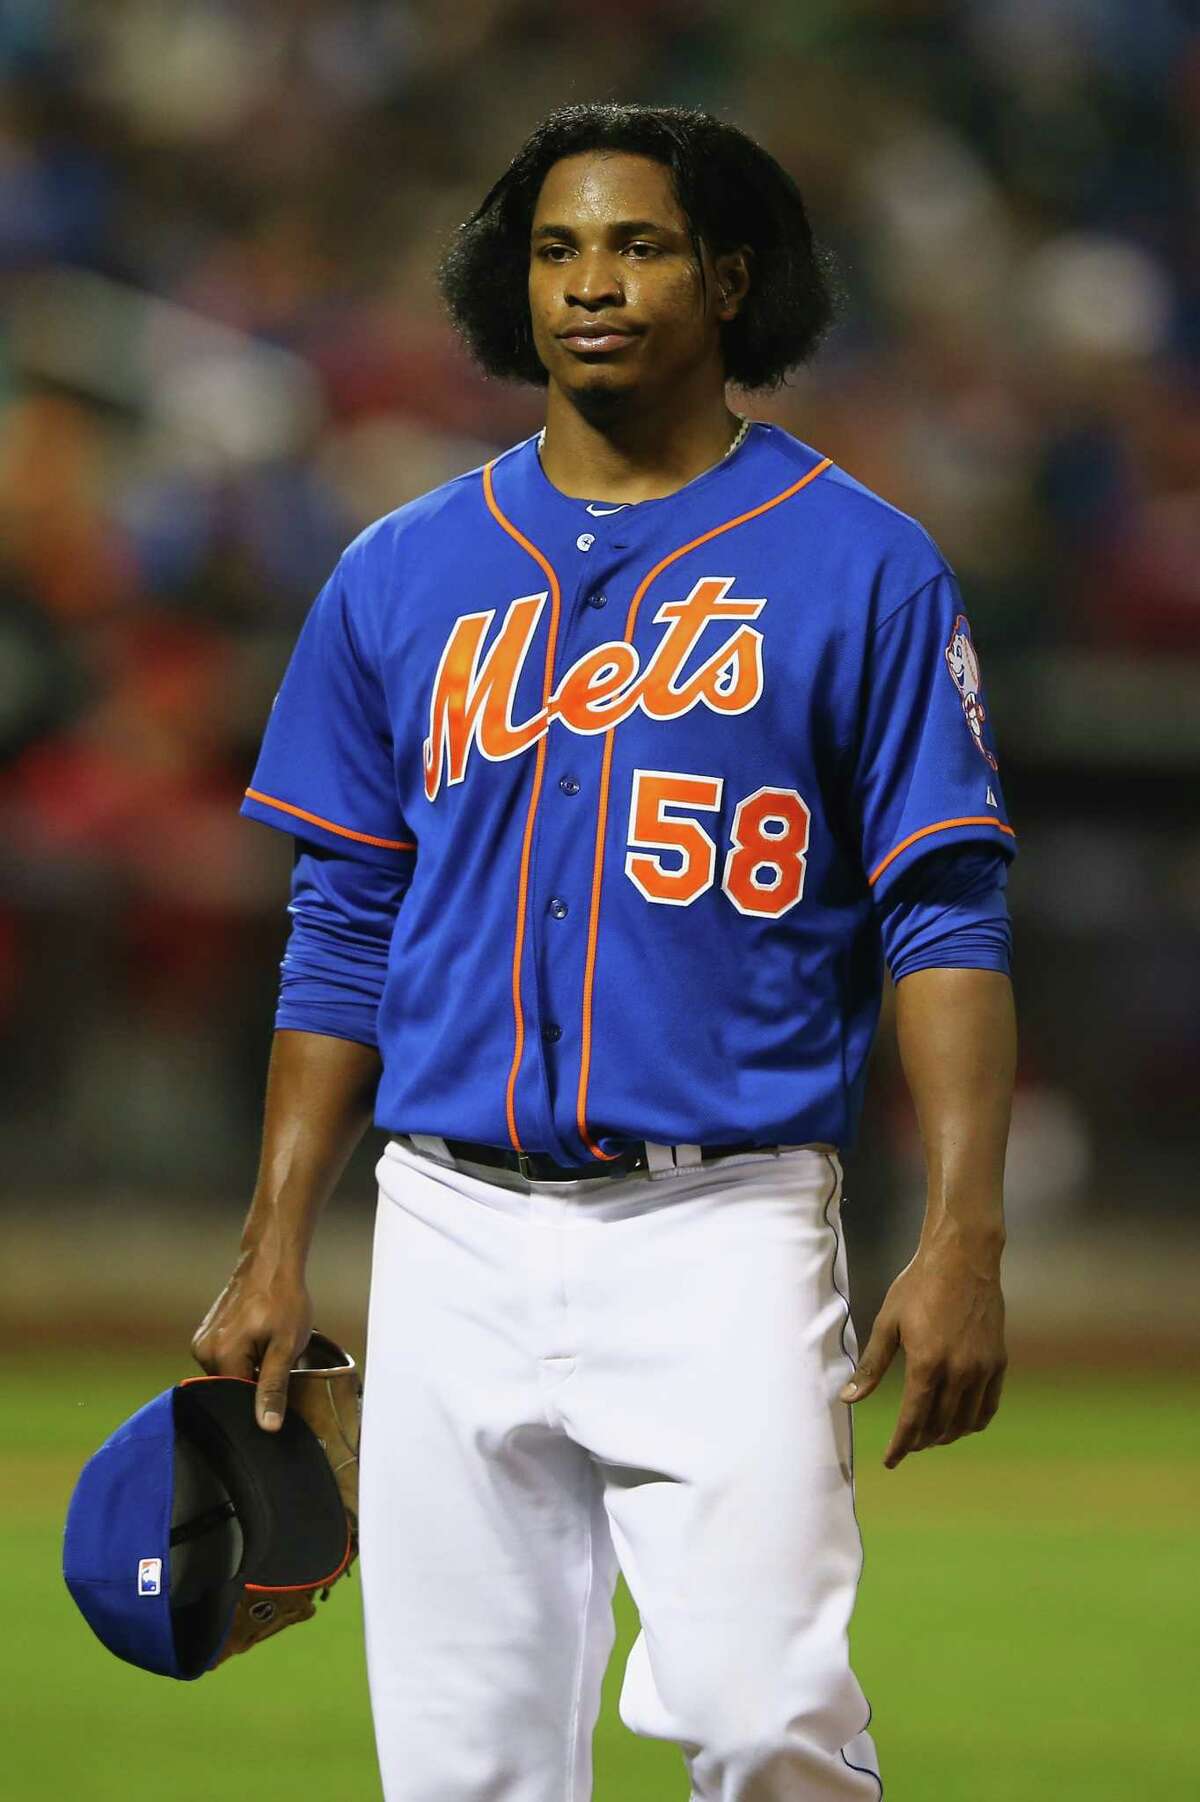 NEW YORK, NY - MAY 09: Jenrry Mejia #58 of the New York Mets leaves the game in the fifth inning against the Philadelphia Phillies during their game on May 9, 2014 at Citi Field in the Flushing neighborhood of the Queens borough of New York City. (Photo by Al Bello/Getty Images) ORG XMIT: 477583015